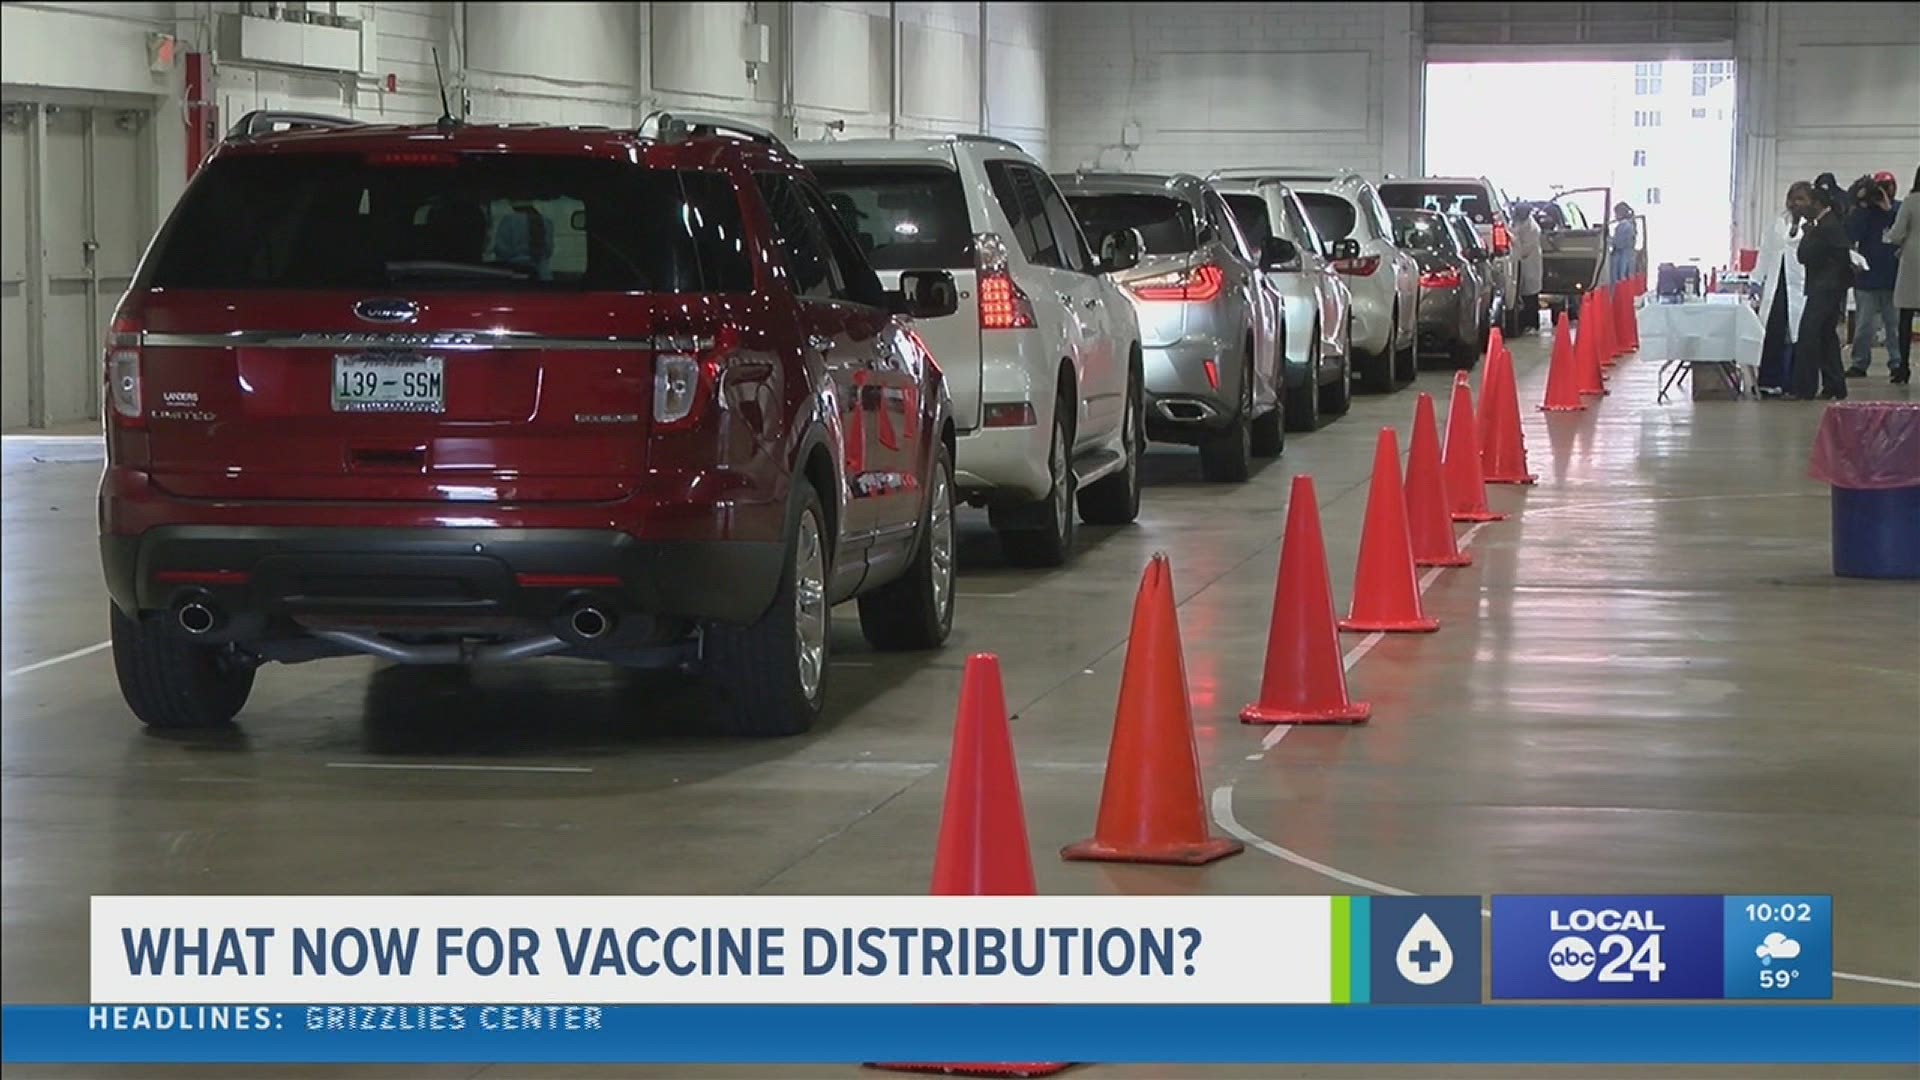 The Shelby County Health Department is under investigation for its handling of COVID-19 vaccine distribution; city of Memphis takes over management of distribution.